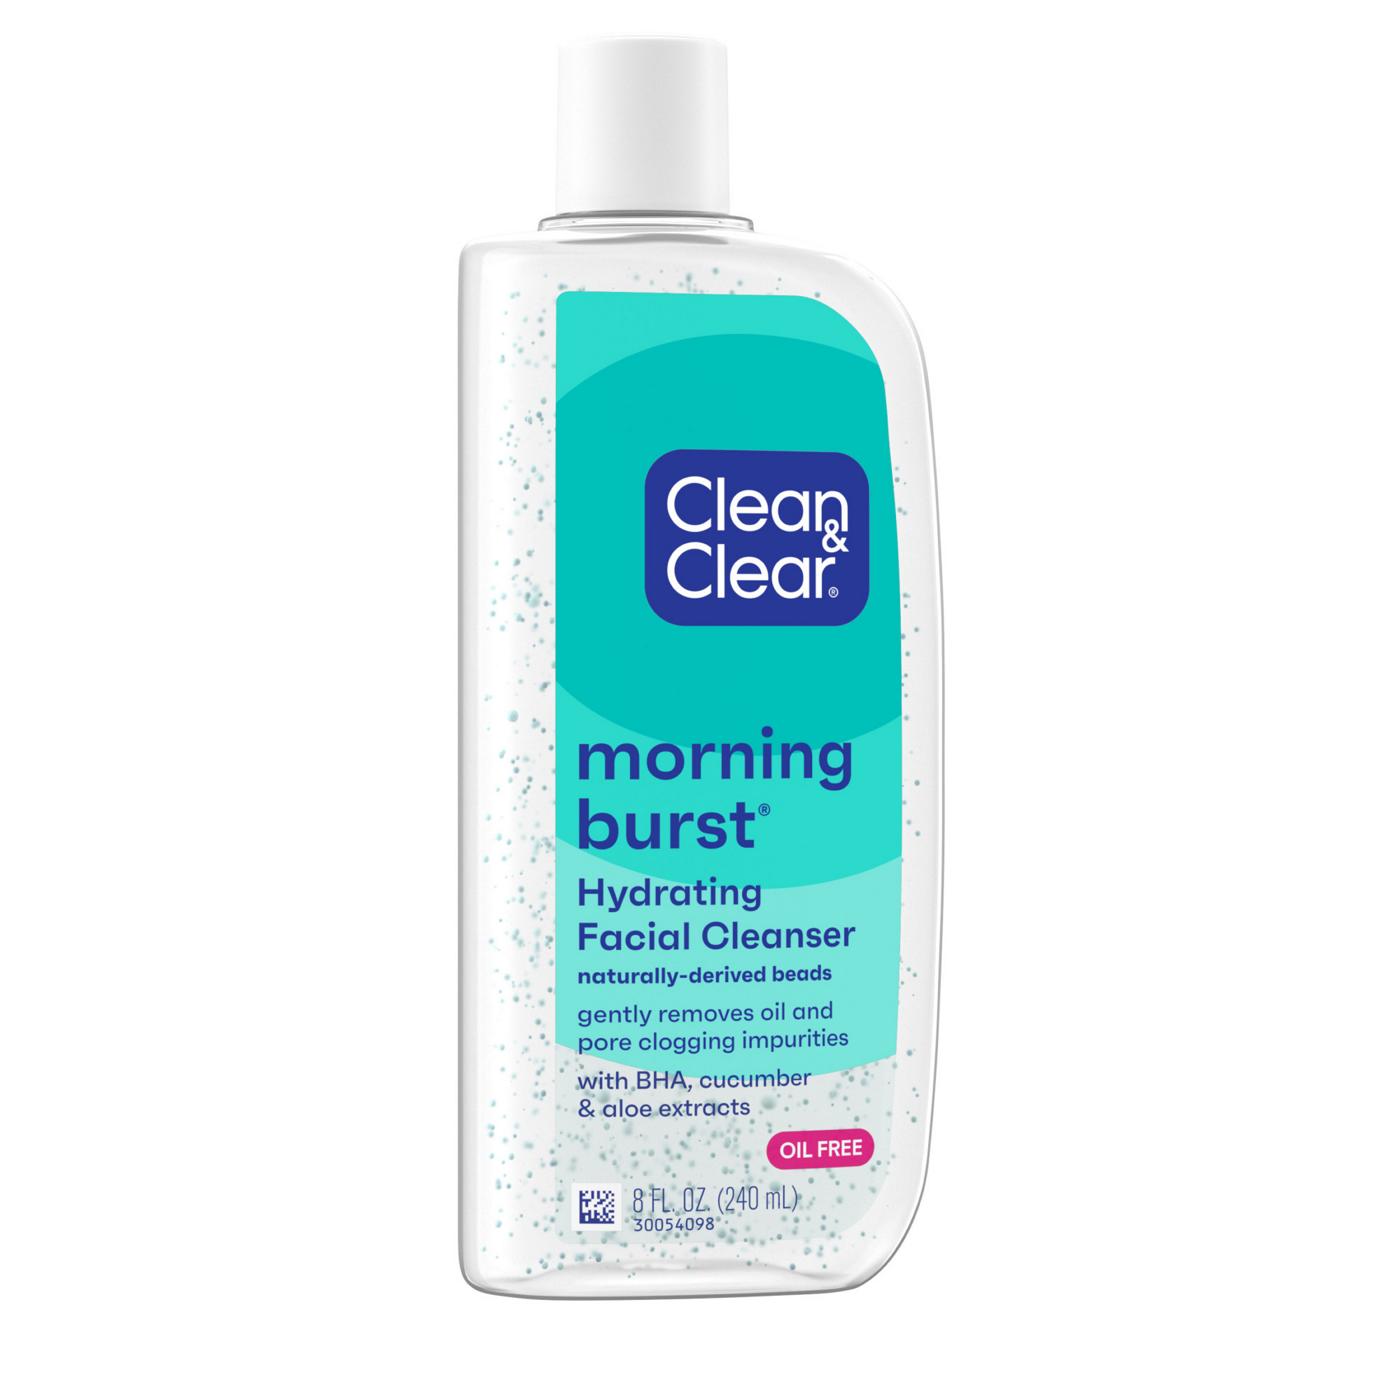 Clean & Clear Morning Burst Hydrating Facial Cleanser; image 7 of 8